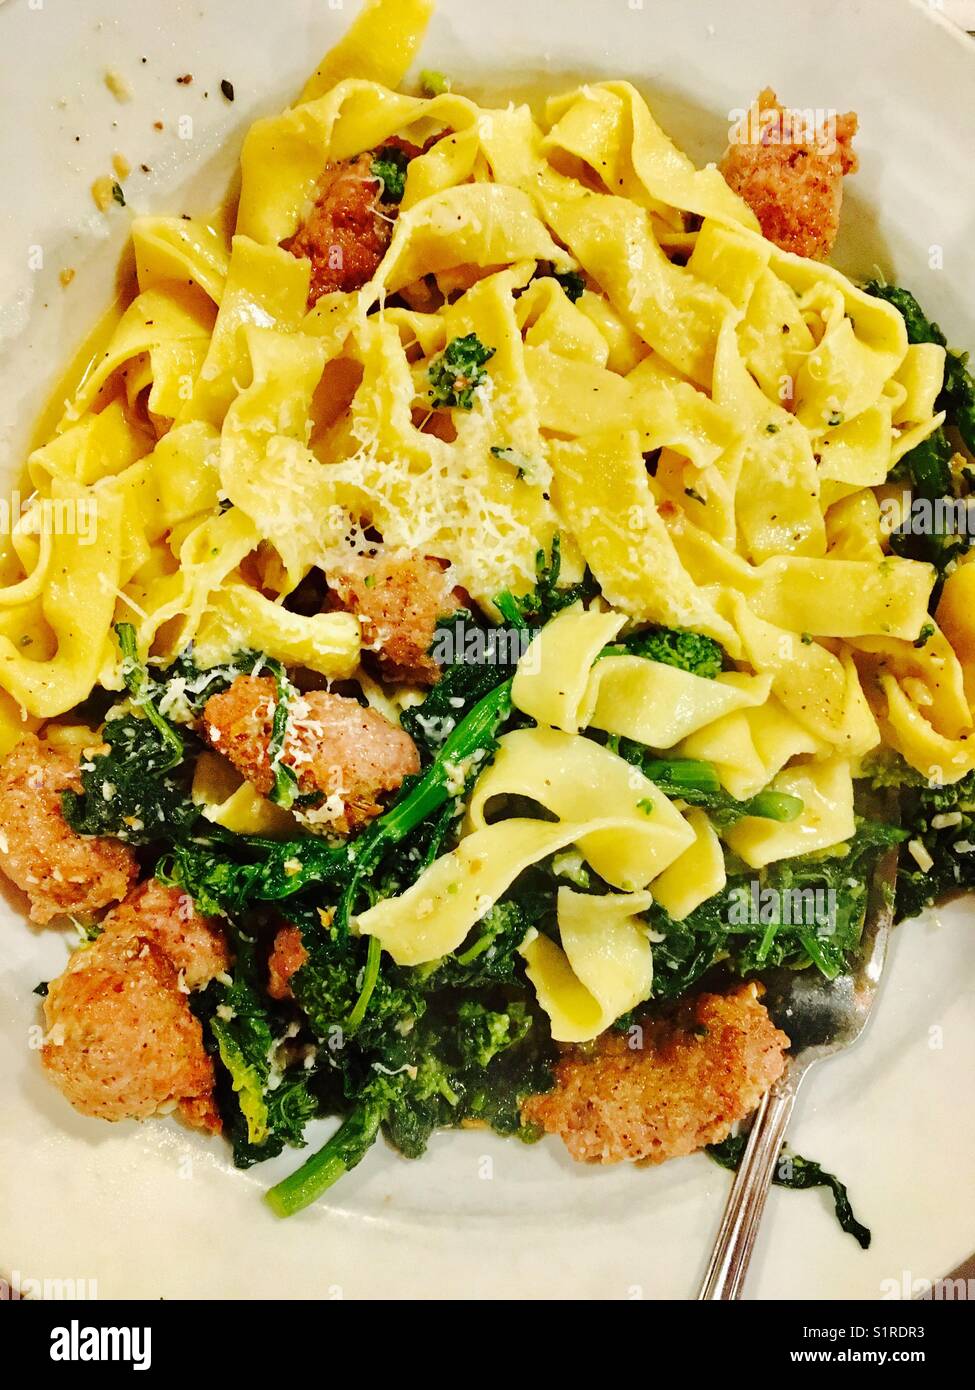 Plate of fresh made pasta with sausage and broccoli rabe Stock Photo